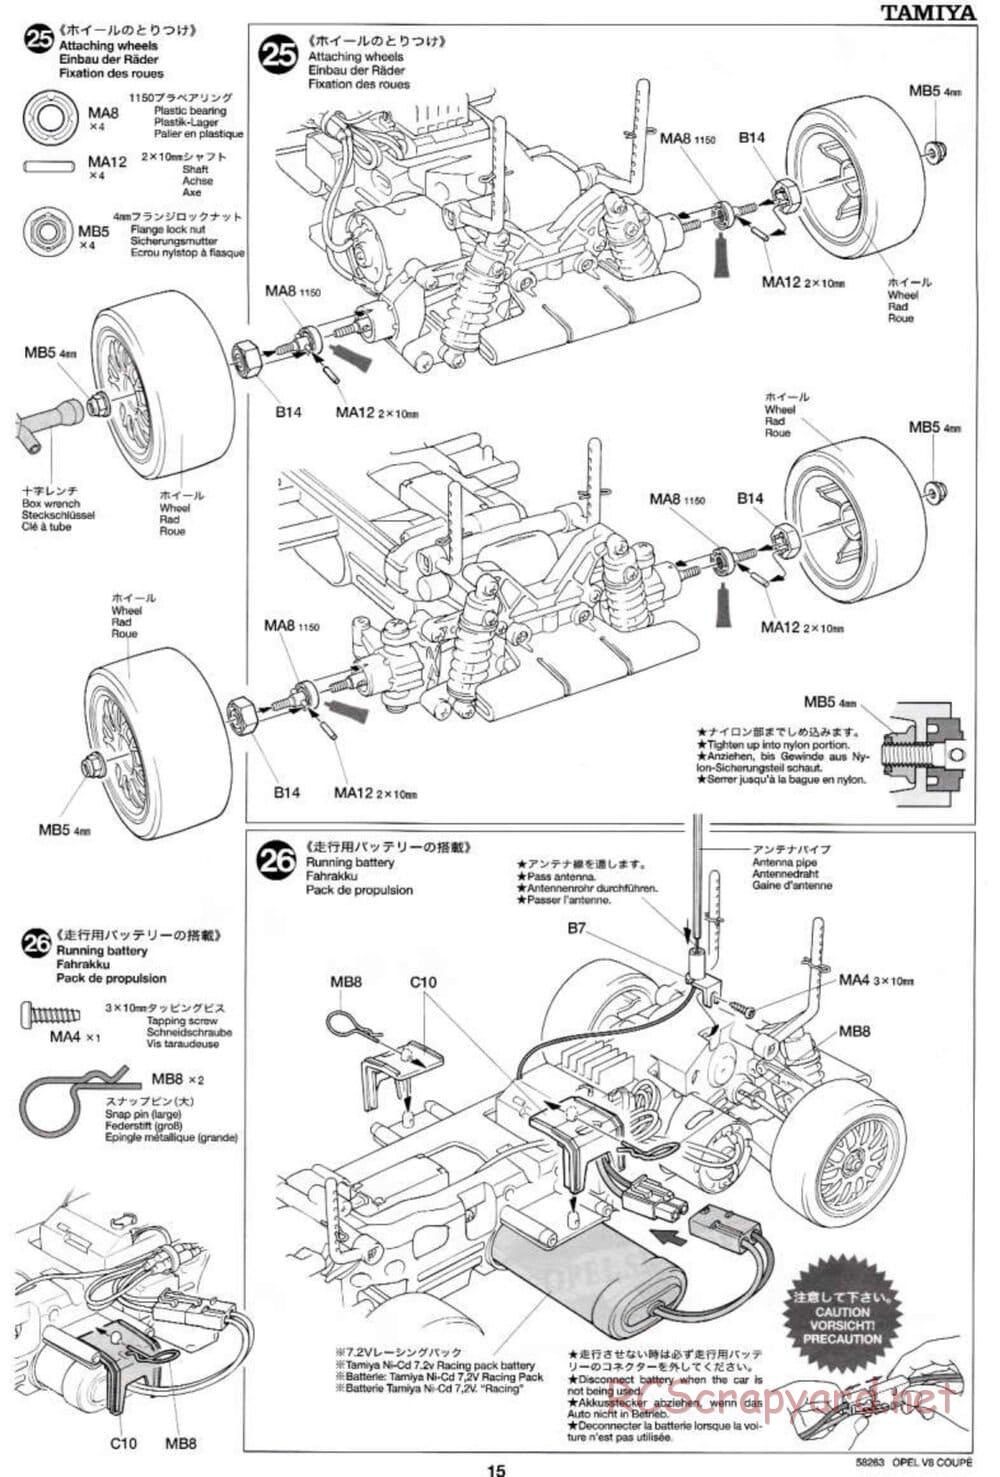 Tamiya - Opel V8 Coupe - TL-01 Chassis - Manual - Page 15